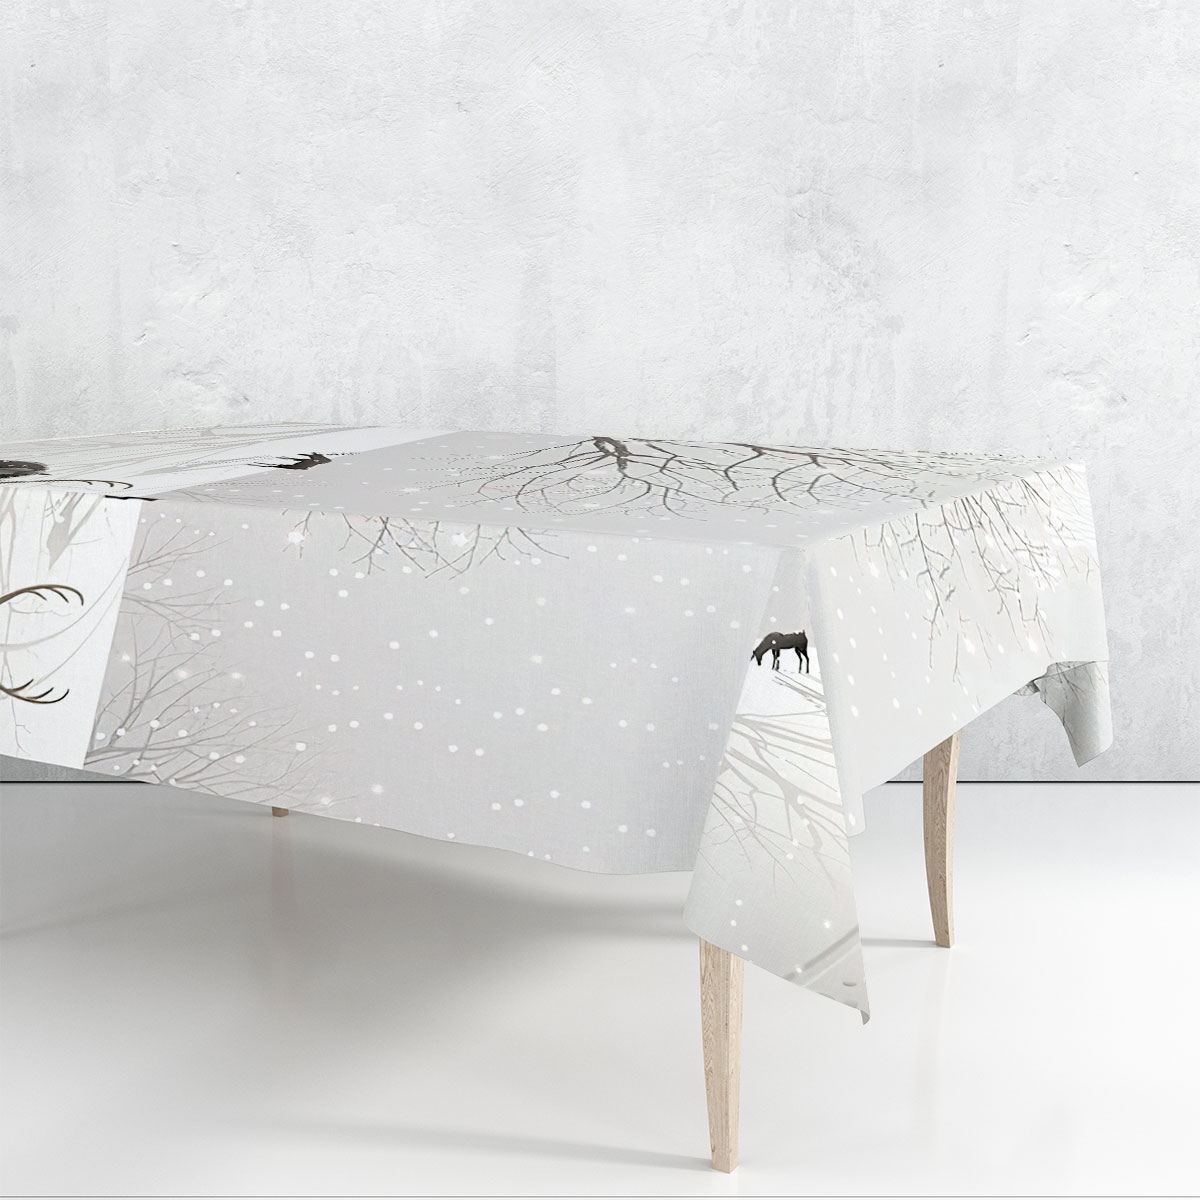 Winer Snow Rectangle Tablecloth_1_2.1